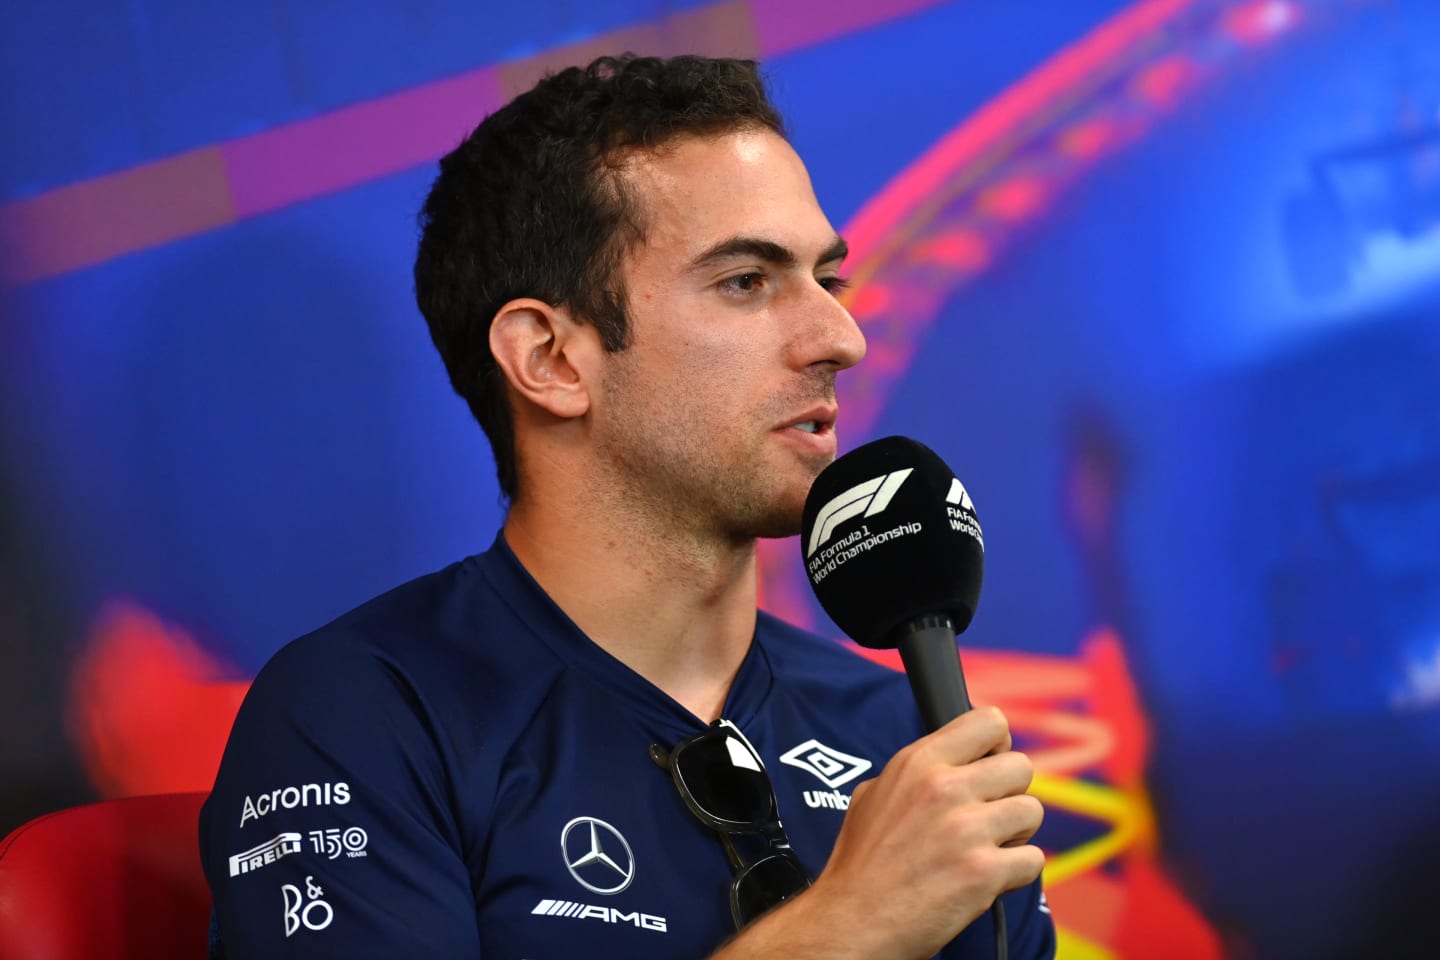 SPA, BELGIUM - AUGUST 25: Nicholas Latifi of Canada and Williams talks in the Drivers Press Conference during previews ahead of the F1 Grand Prix of Belgium at Circuit de Spa-Francorchamps on August 25, 2022 in Spa, Belgium. (Photo by Dan Mullan/Getty Images)